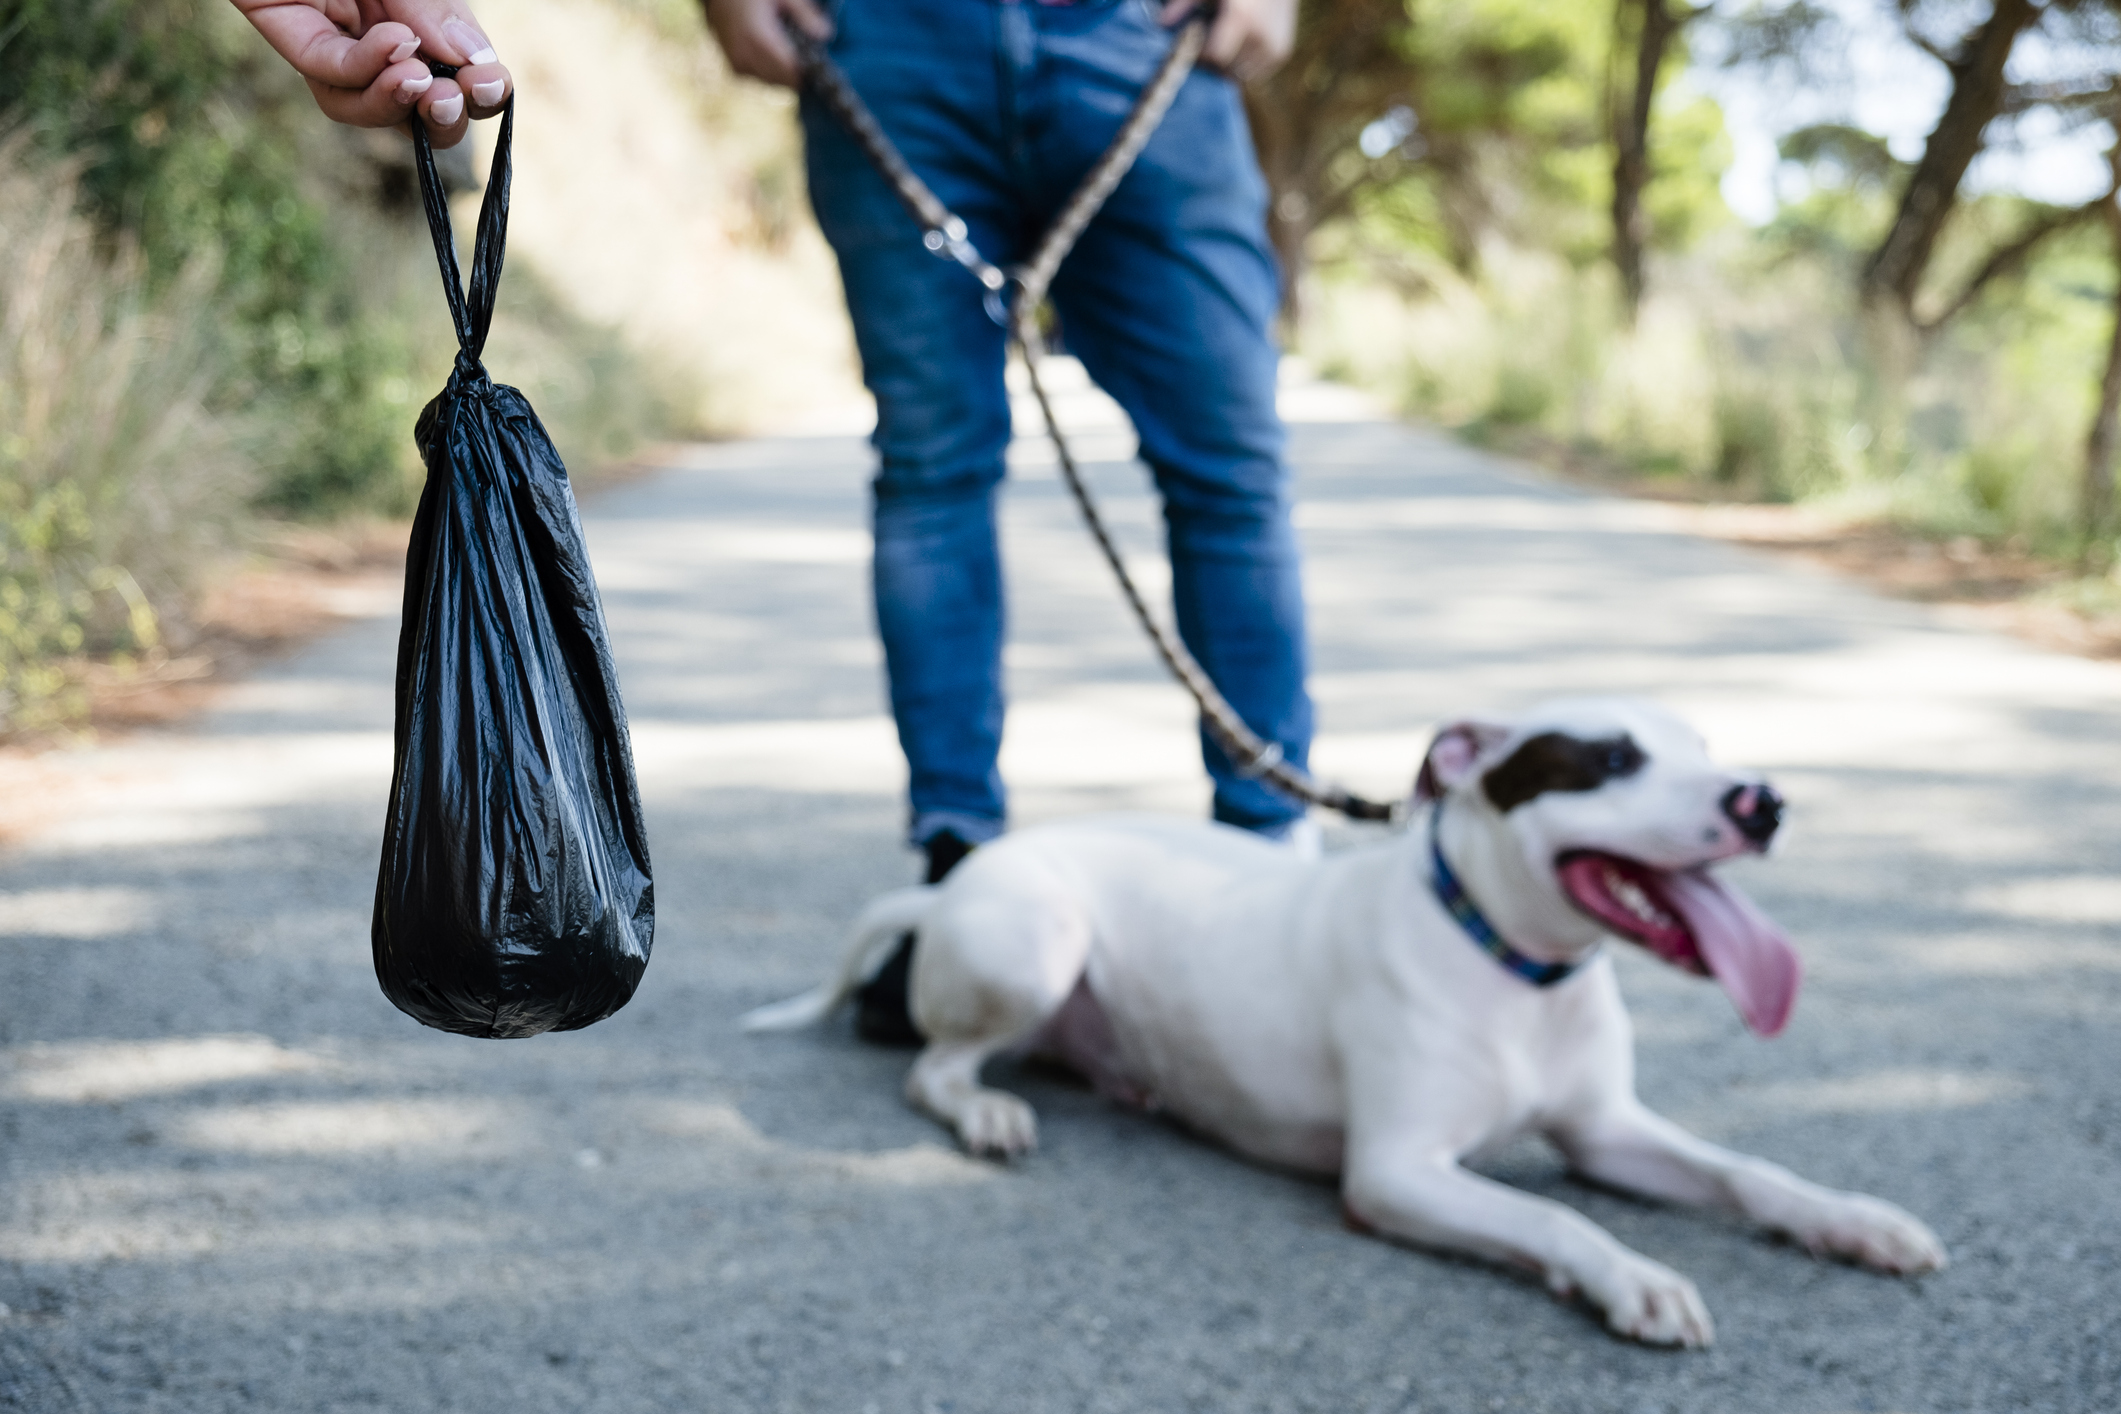 How to Make Your Own Dog Poop Scooper: A Step-by-Step Guide